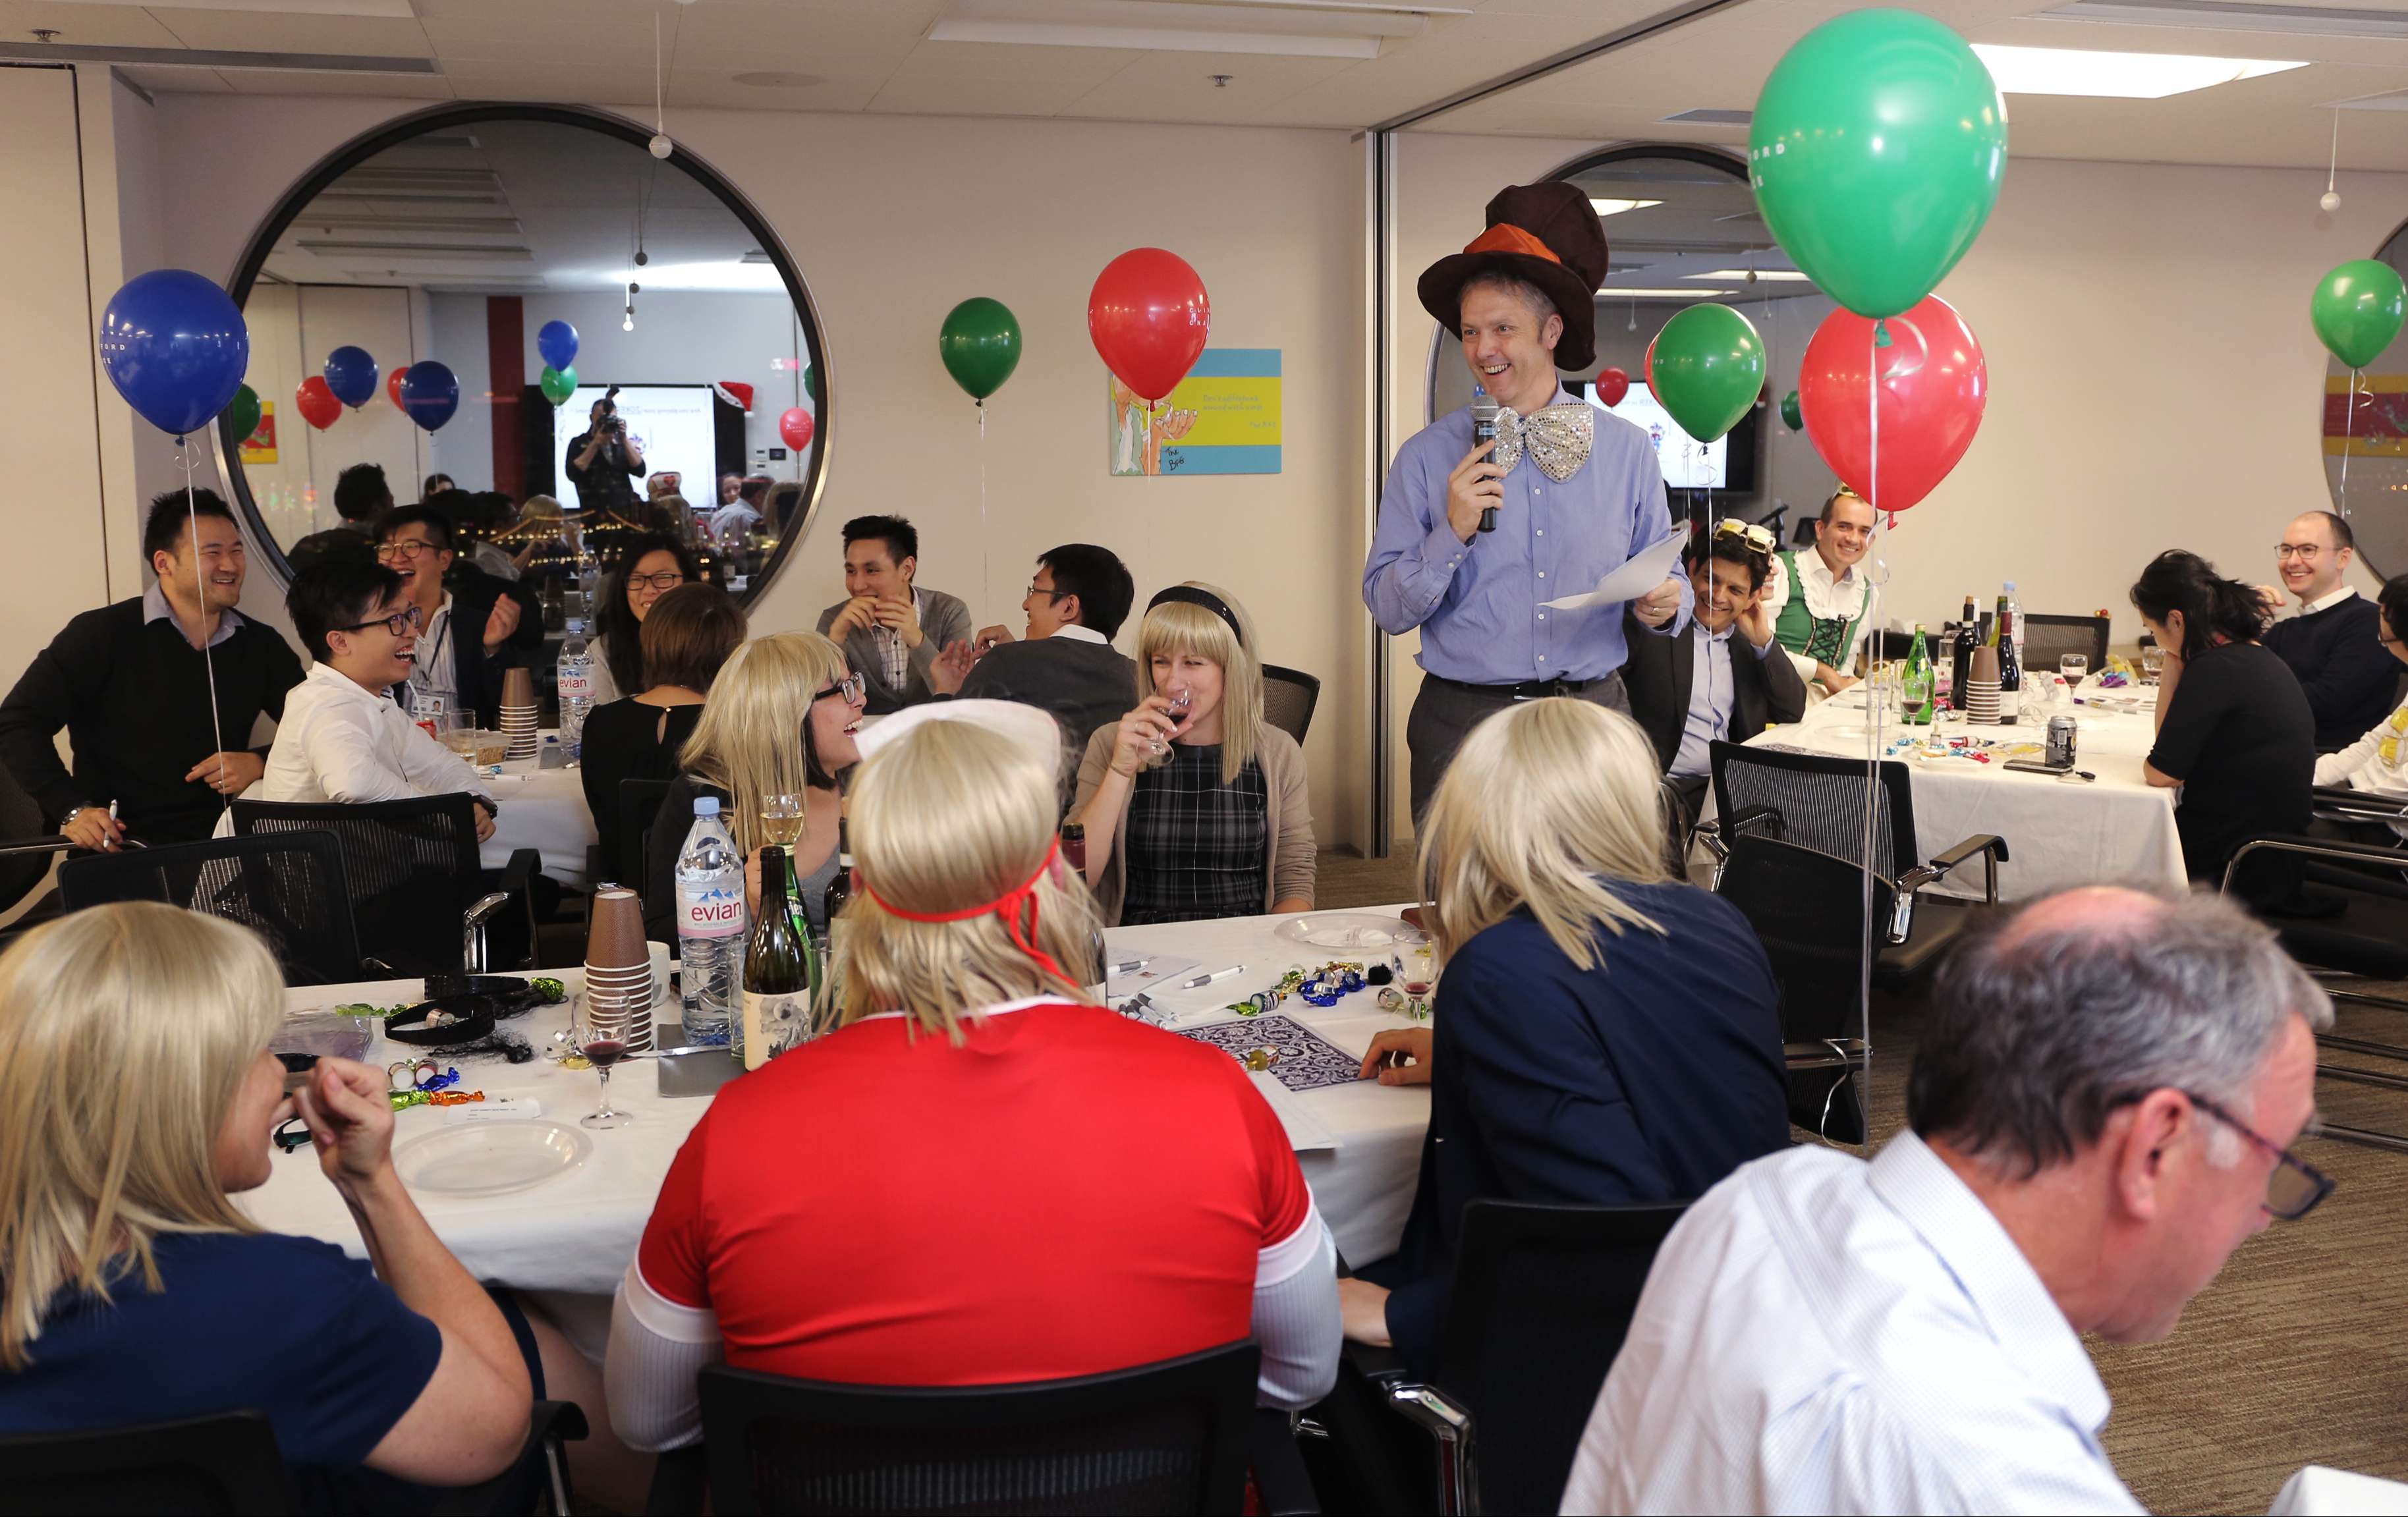 Clifford Chance employees try to come up with the answers in their annual quiz. Photo: Paul Yeung